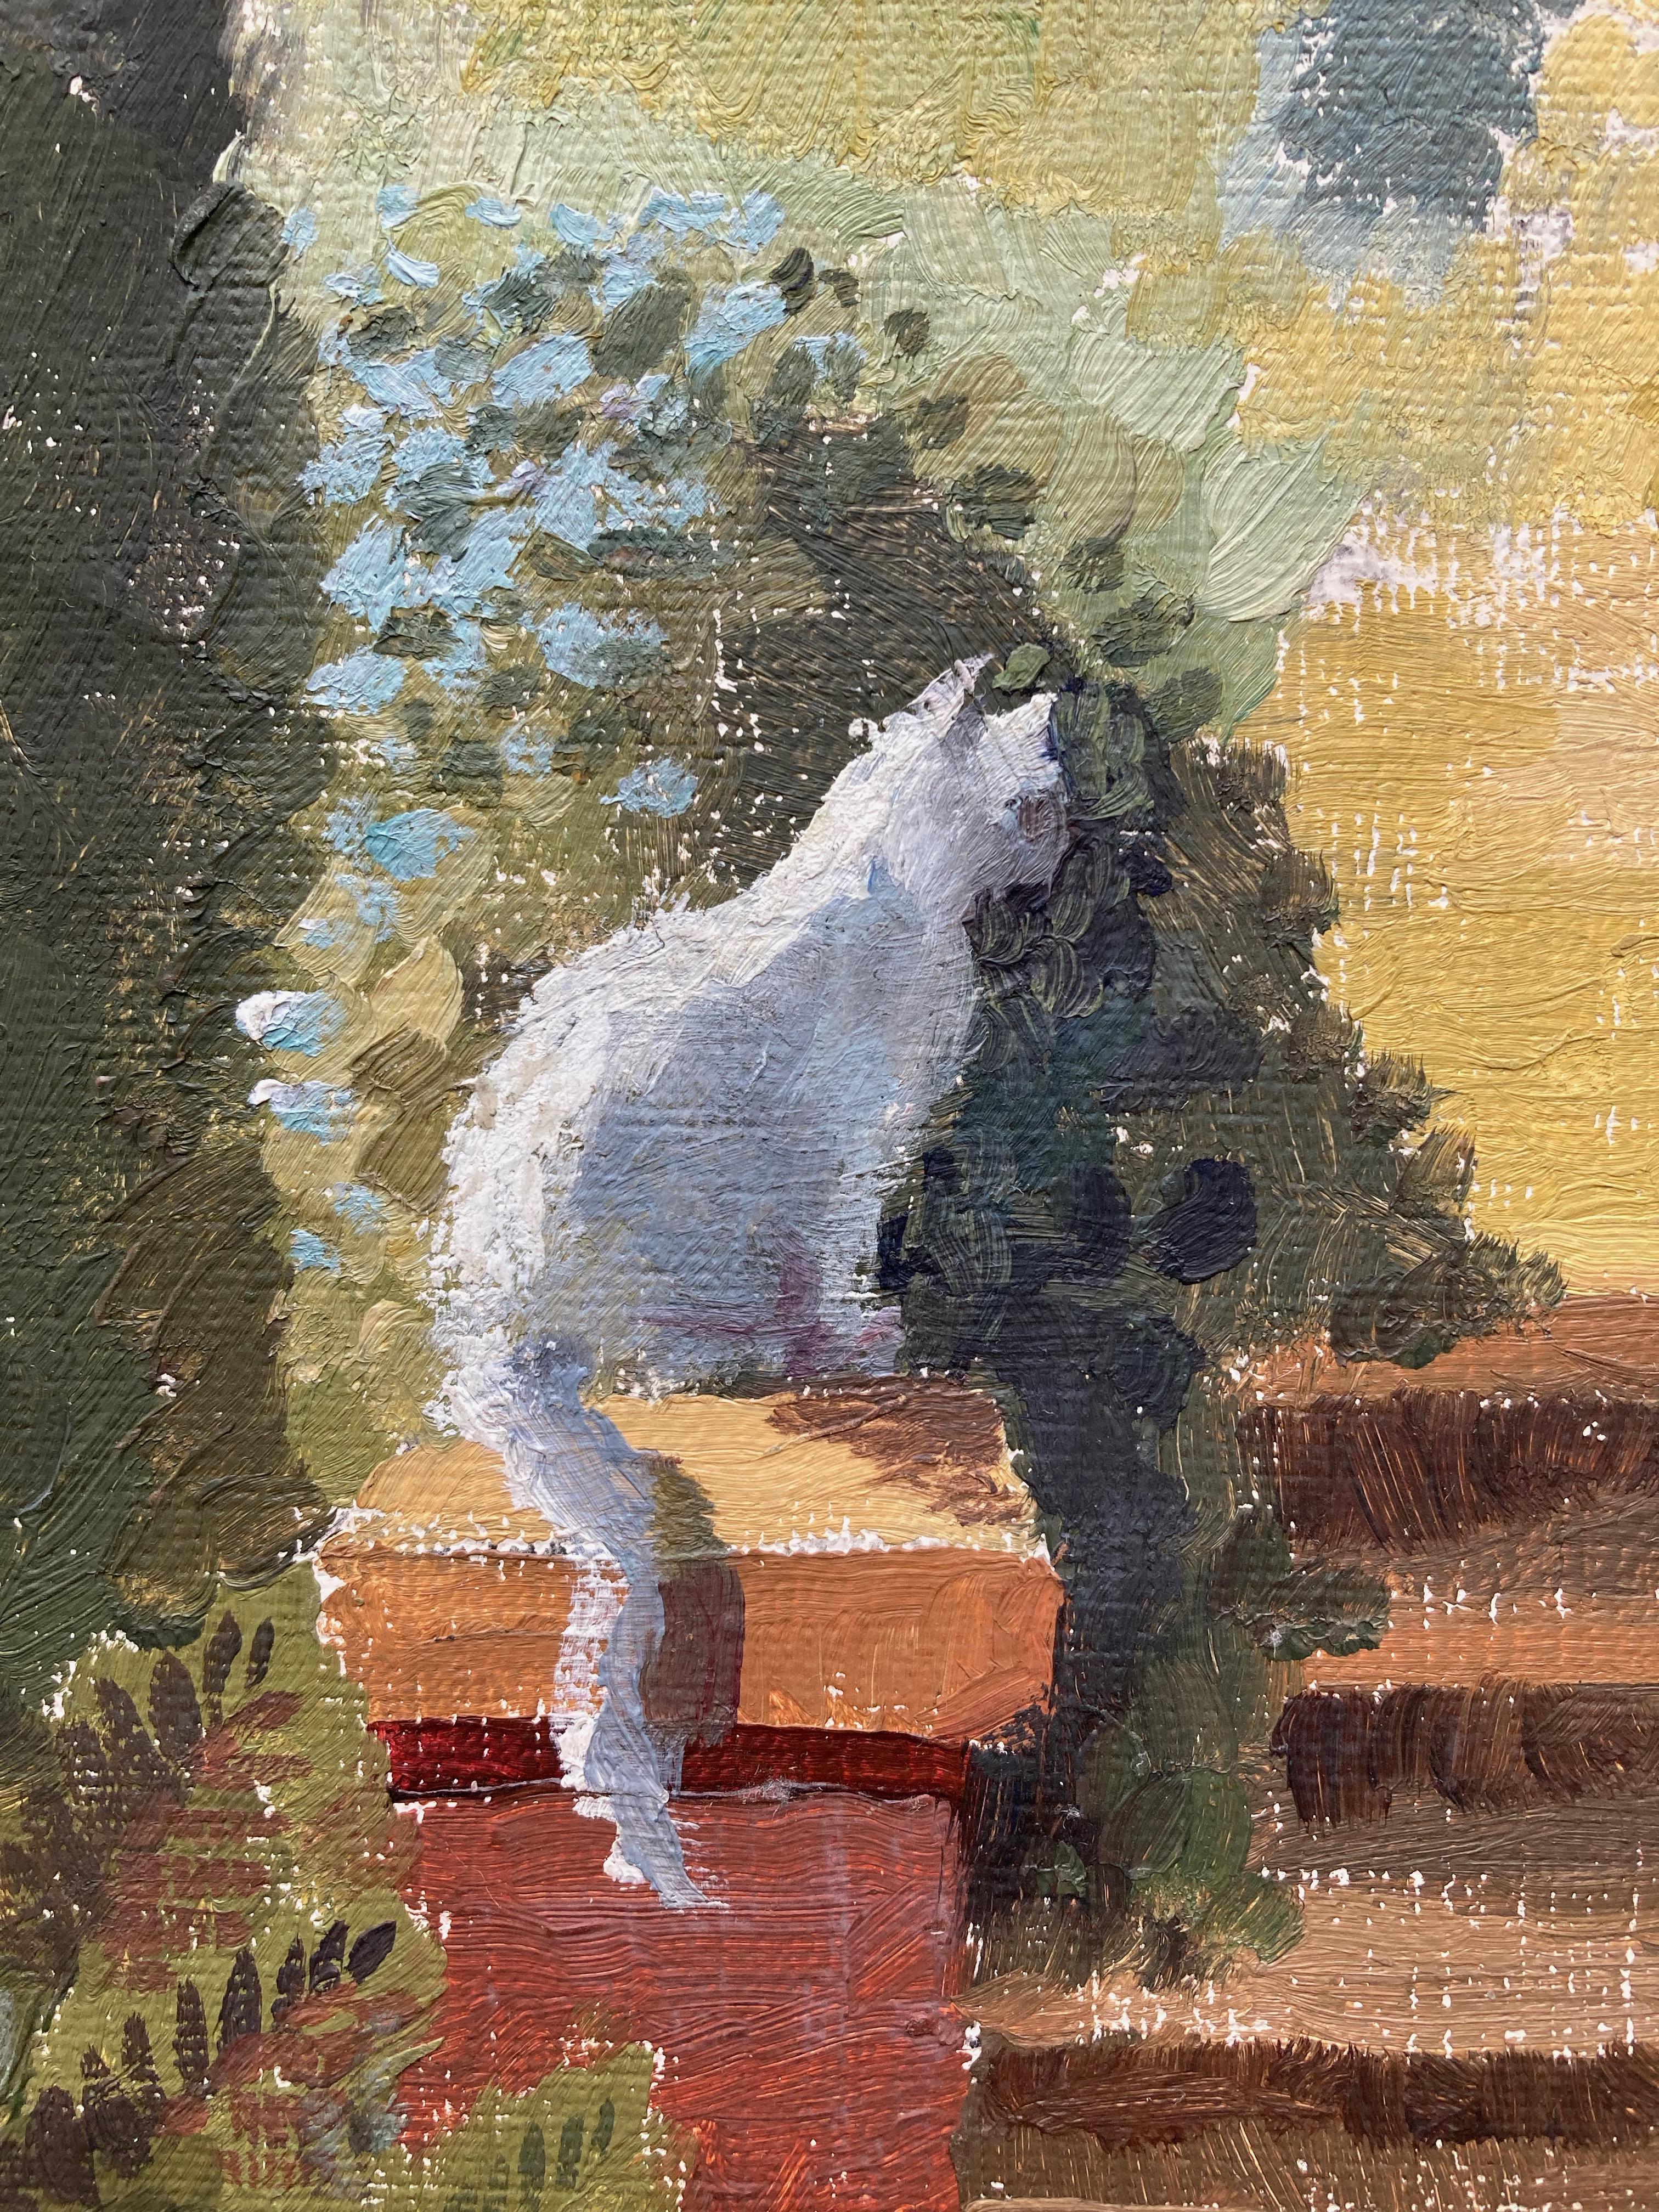 A wonderful image painted in an attractive palette.

Franklin White (1892-1975)
A cat resting in a sunny courtyard 
Signed and indistinctly dated (19)41?
Oil on canvas laid on board
14¼ x 10¼ inches unframed
18 x 14 inches with the frame

Frankin